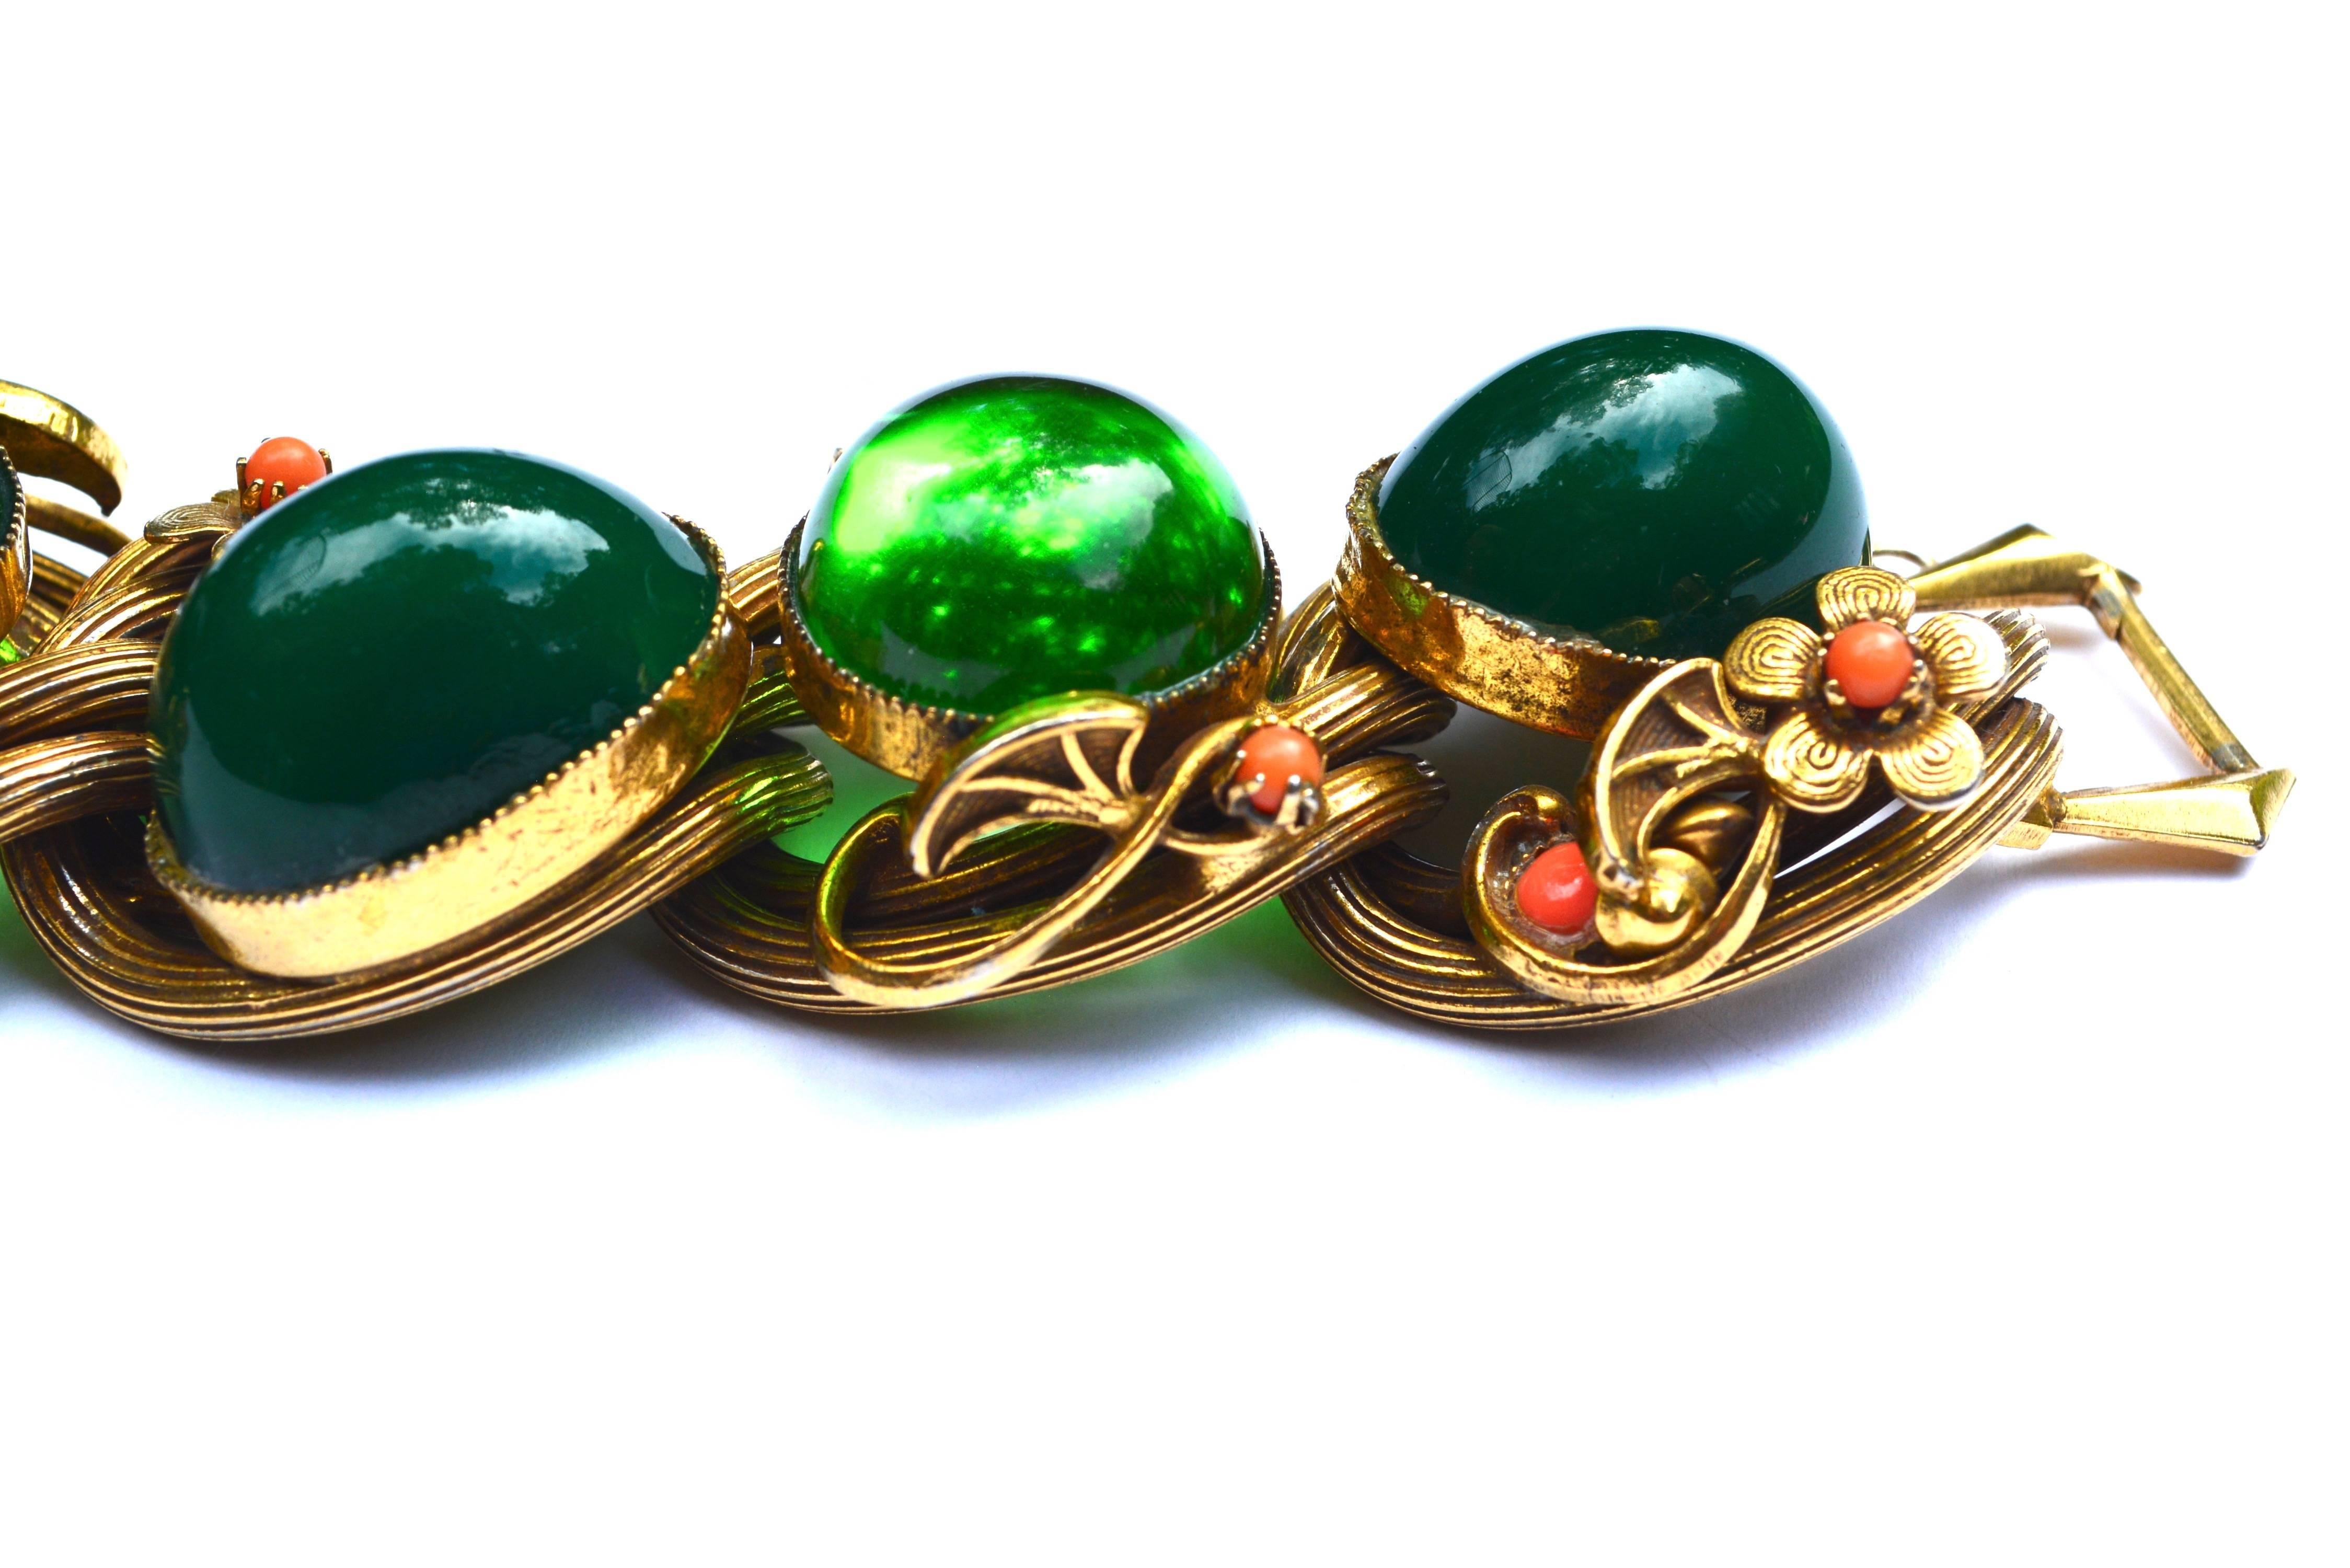 50s oversized two toned glass bracelet. Construction appears to be very similar to Selro, but it is unsigned.  The cabochons appear to be frosted darker green glass with faceted boarders and lighter apple sauce style green glass pieces. The chunky